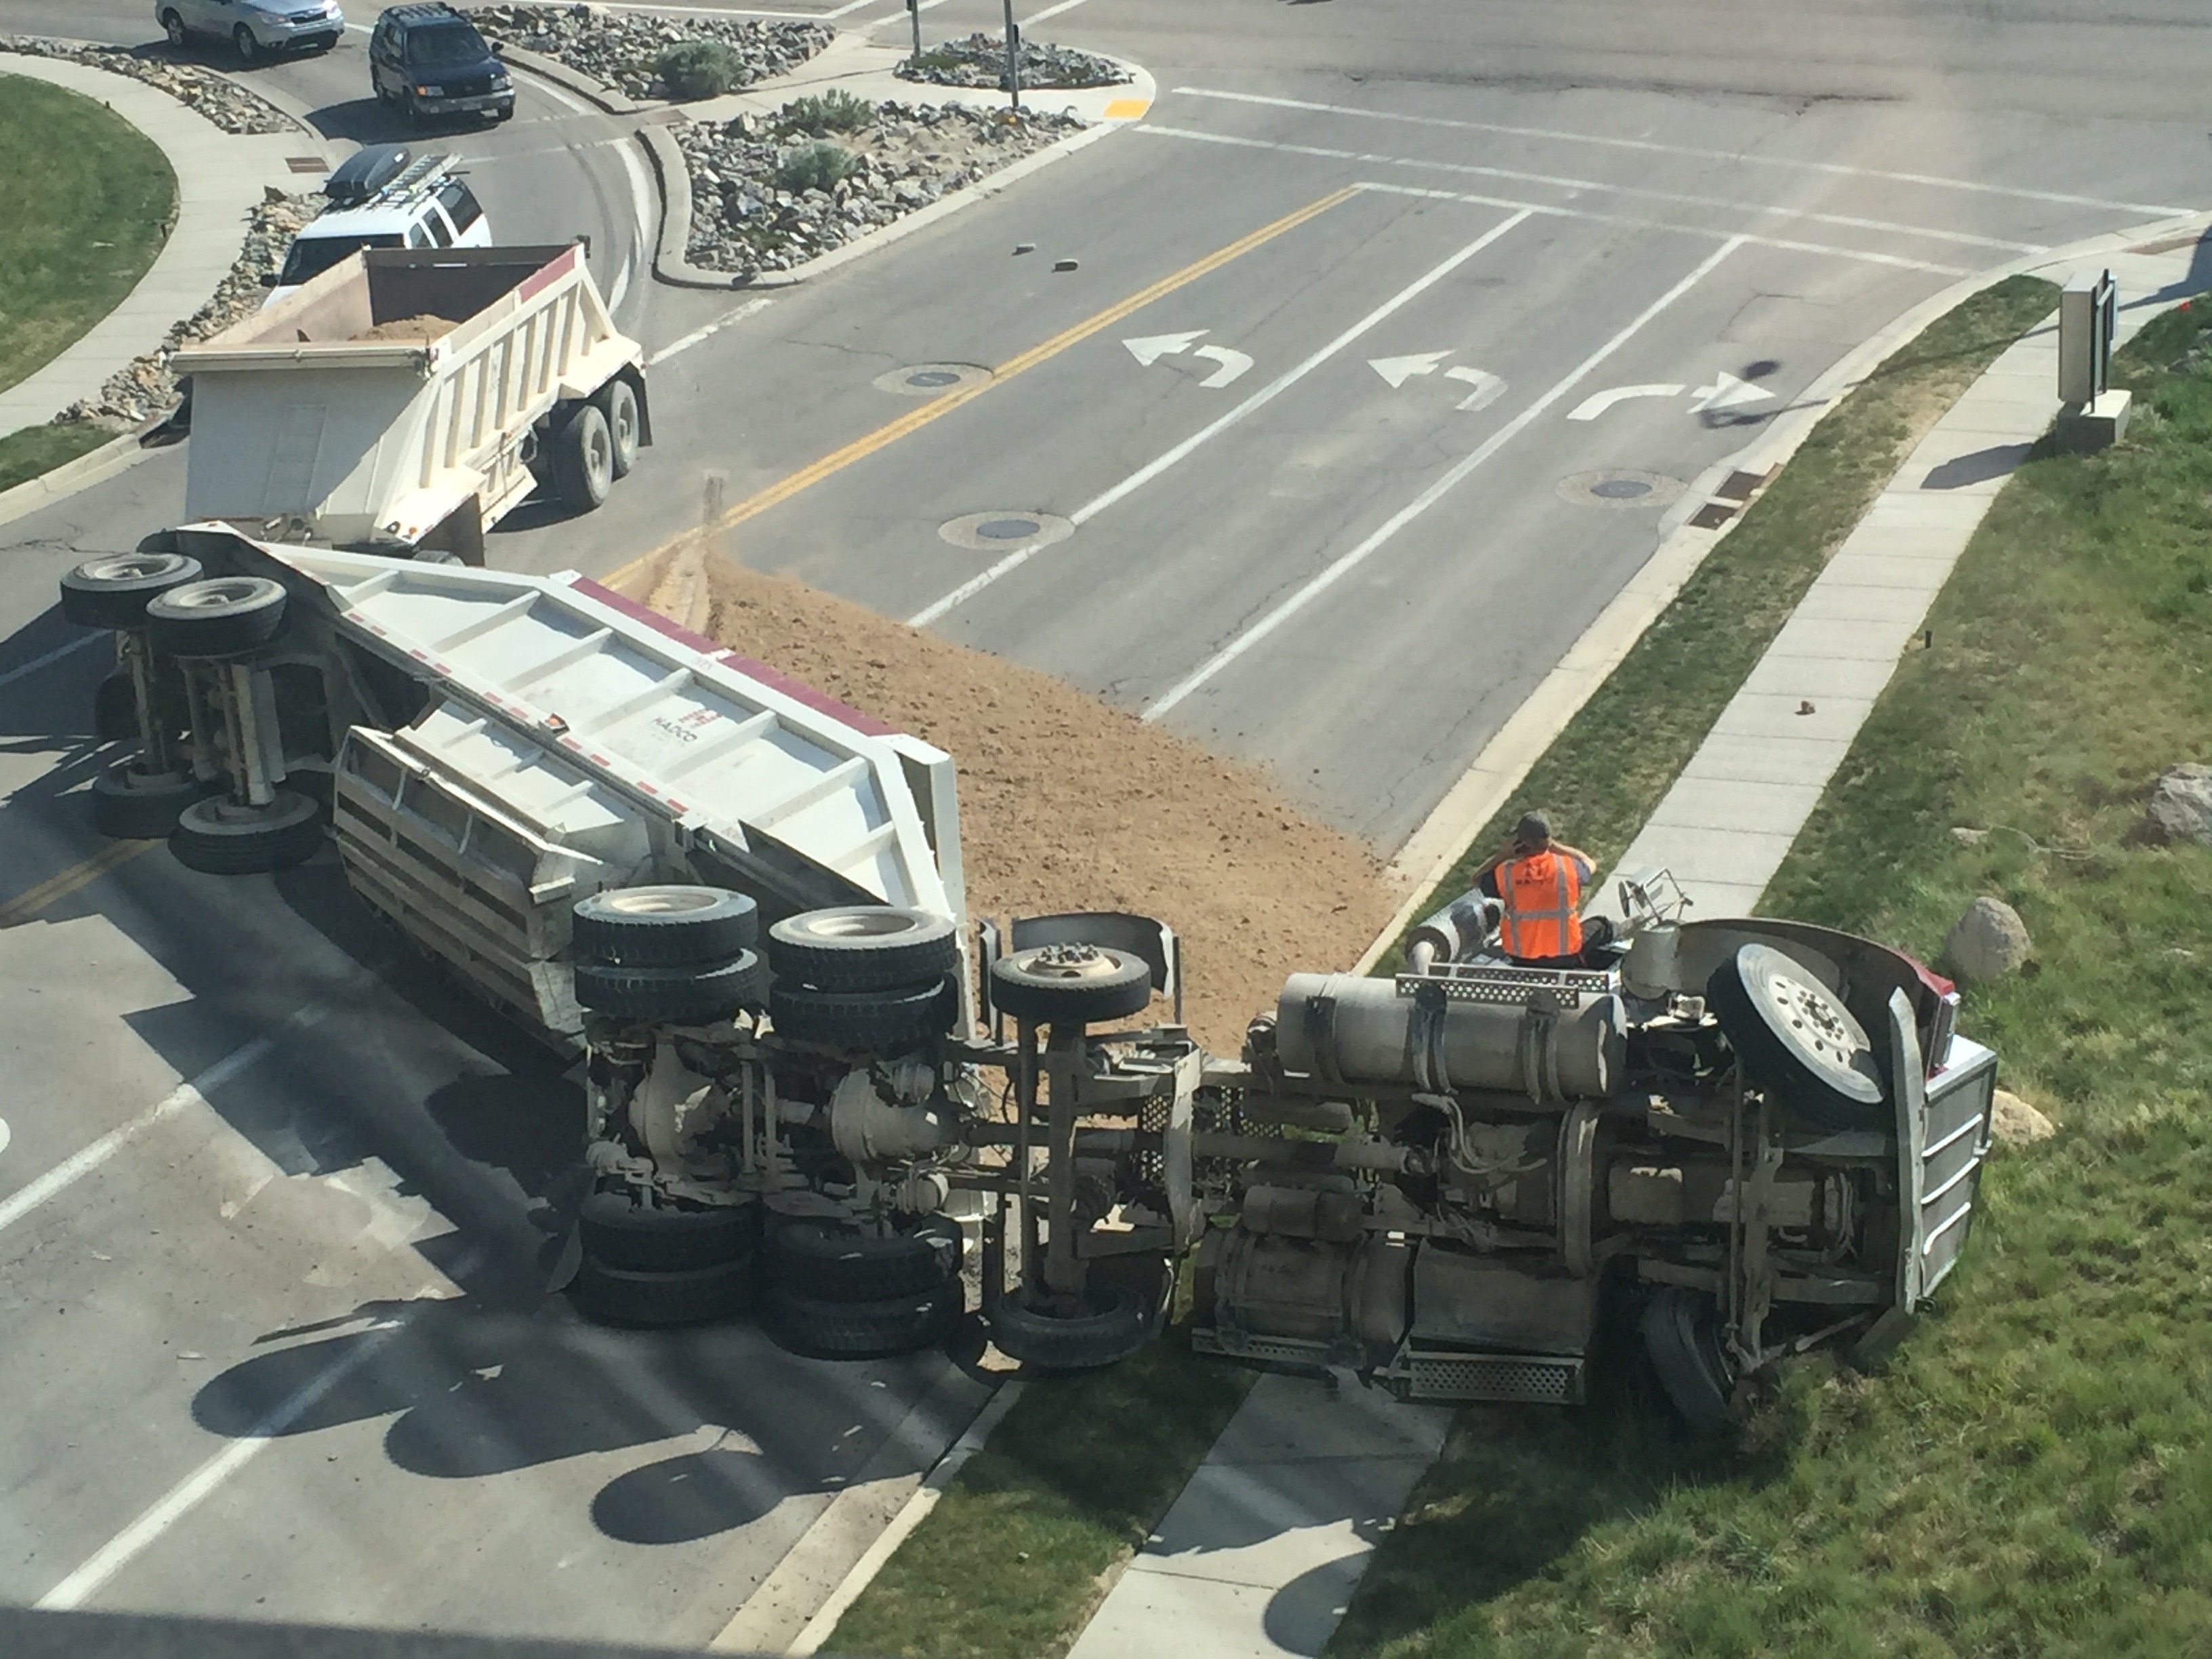 Truck On Its Side due to poor or inadequate fleet maintenance